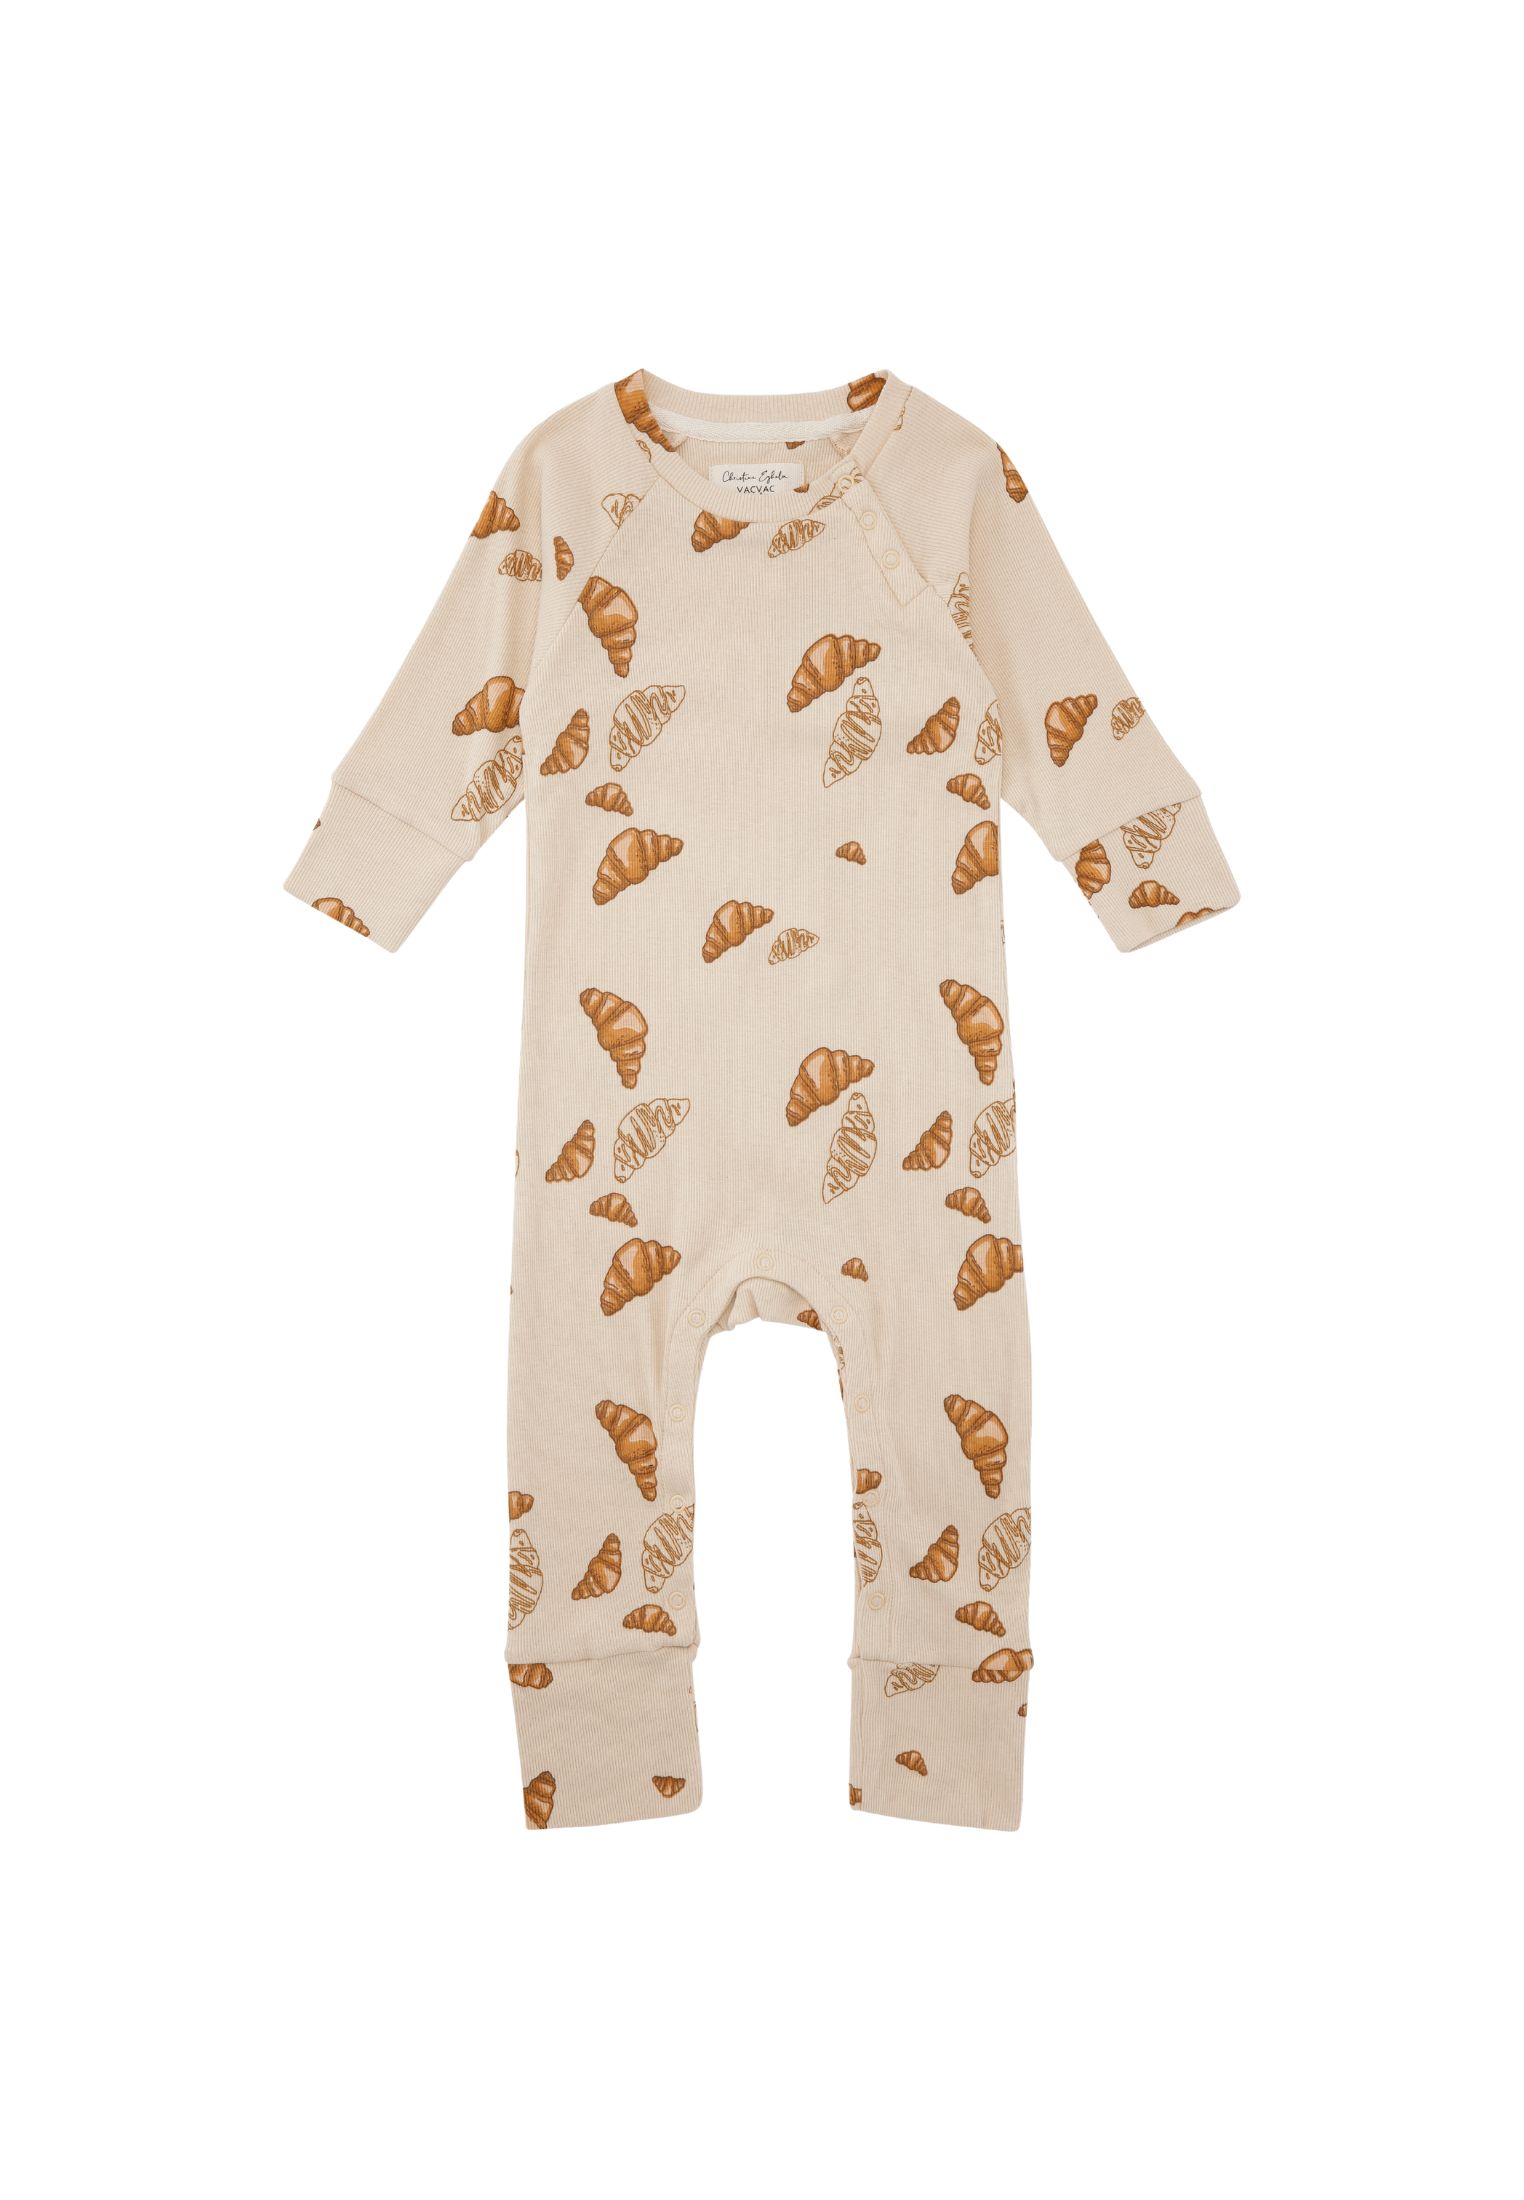 MAMA.LICIOUS Baby one-piece suit - 99999960